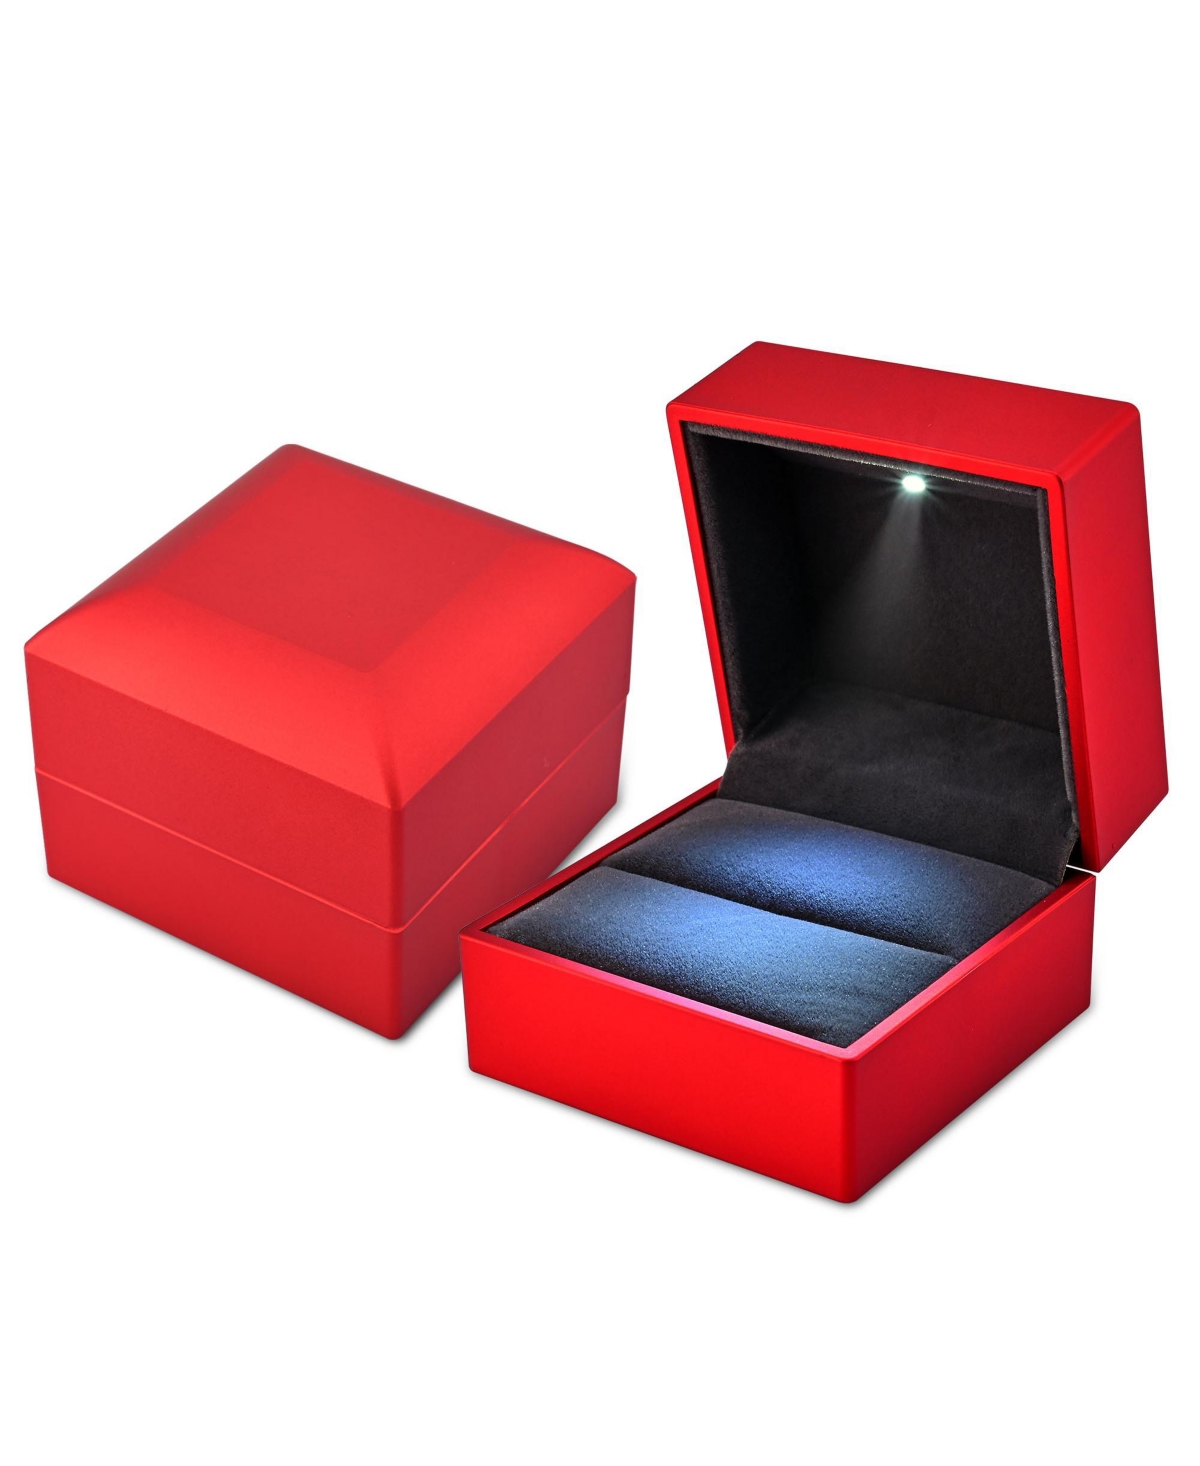 Led Ring Box Jewelry Wedding Engagement Proposal Lighted Ear Ring Case 2 Pack - Red